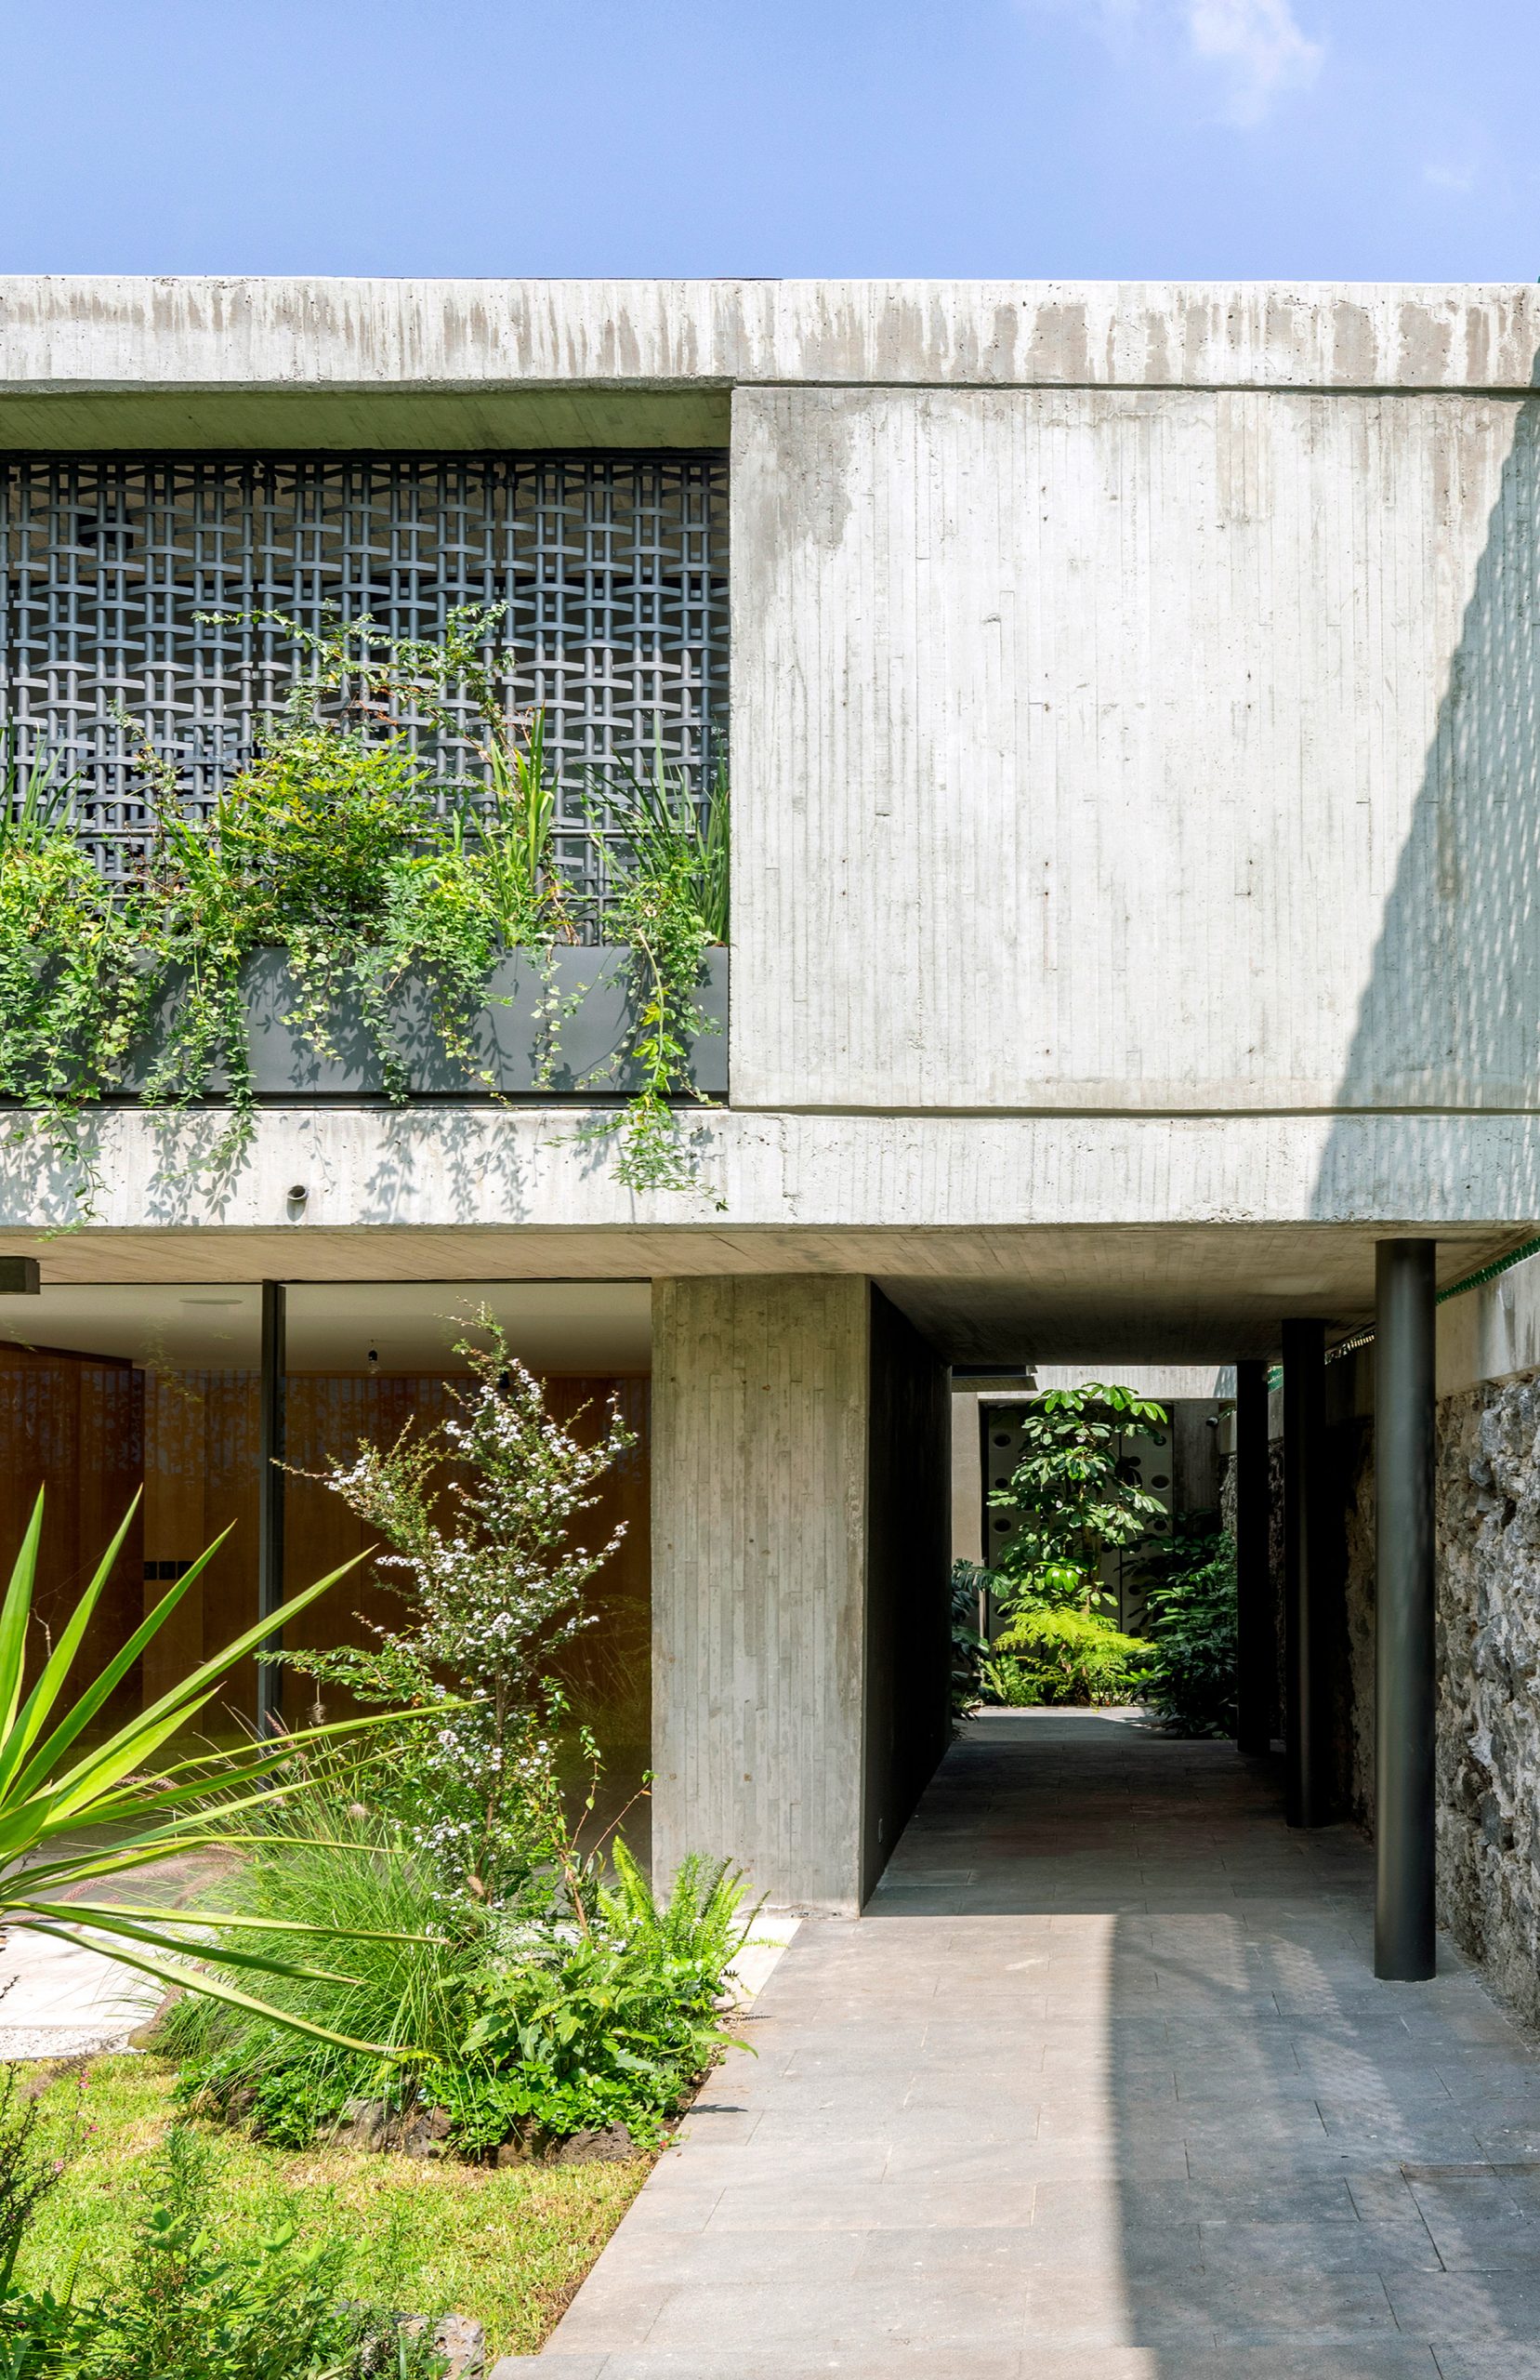 Lattice screens and concrete walls of a house in Mexico City